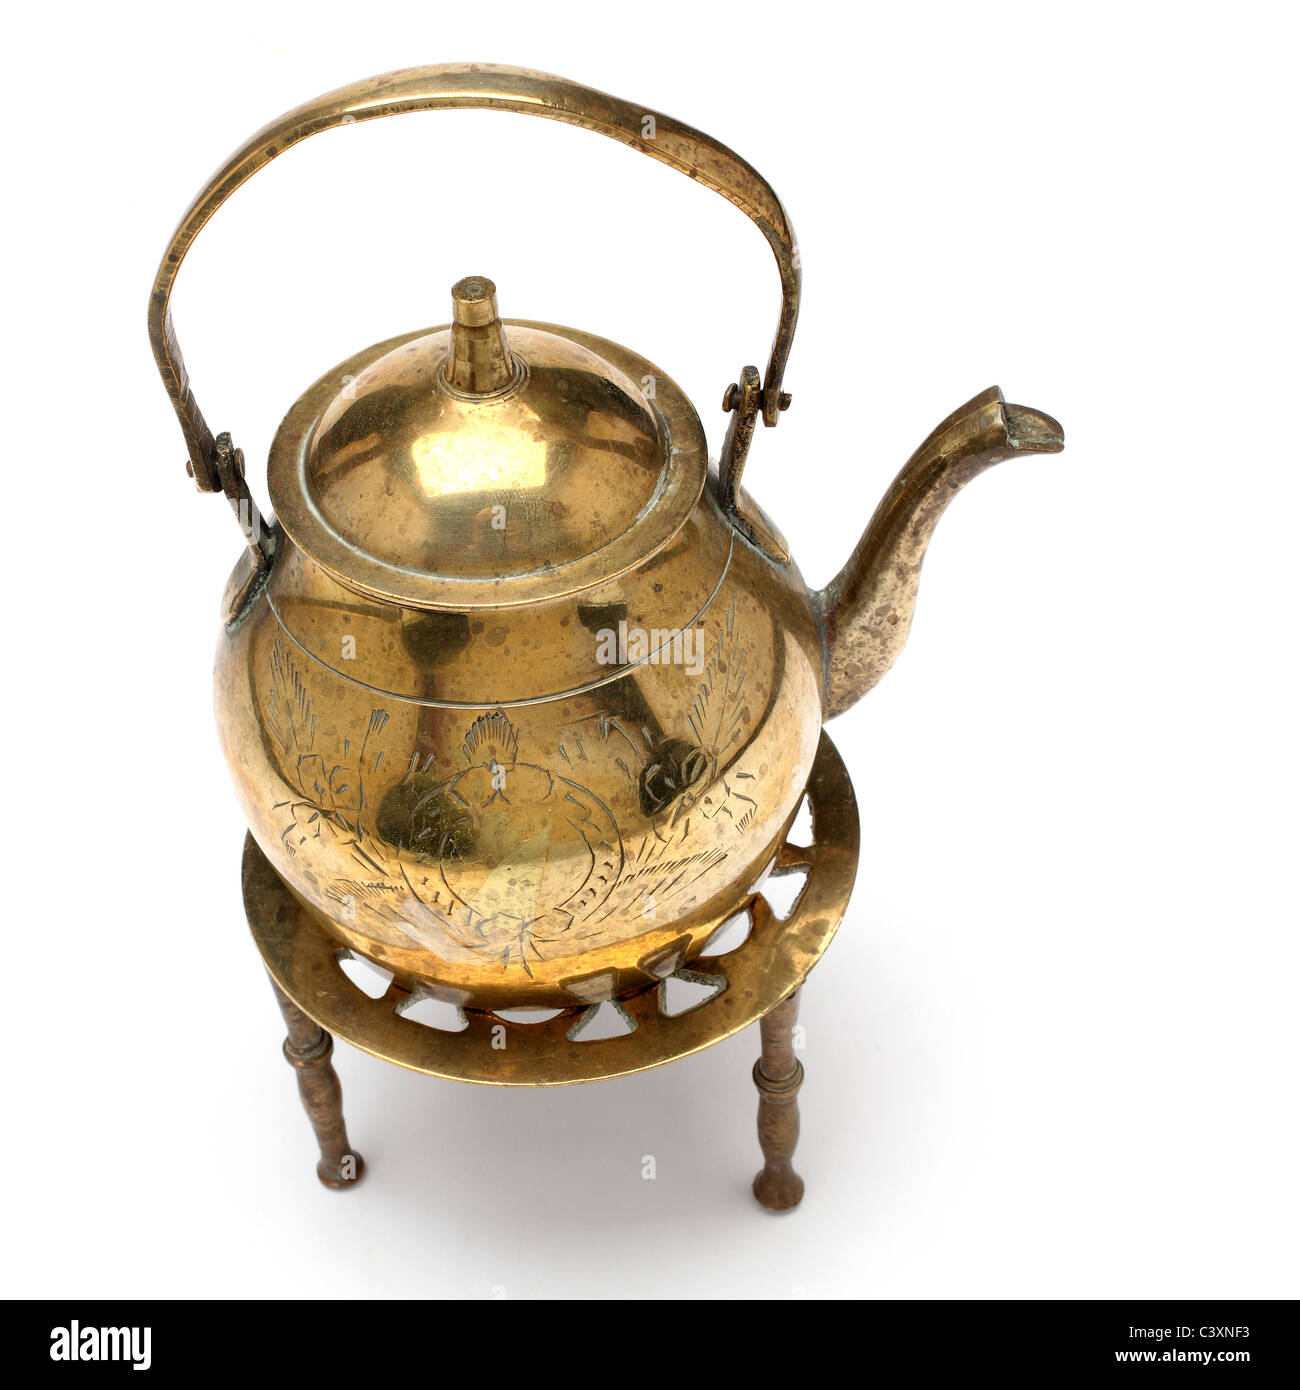 Old Brass Teapot with Porcelain Handle Stock Image - Image of engraving,  closeup: 39579193